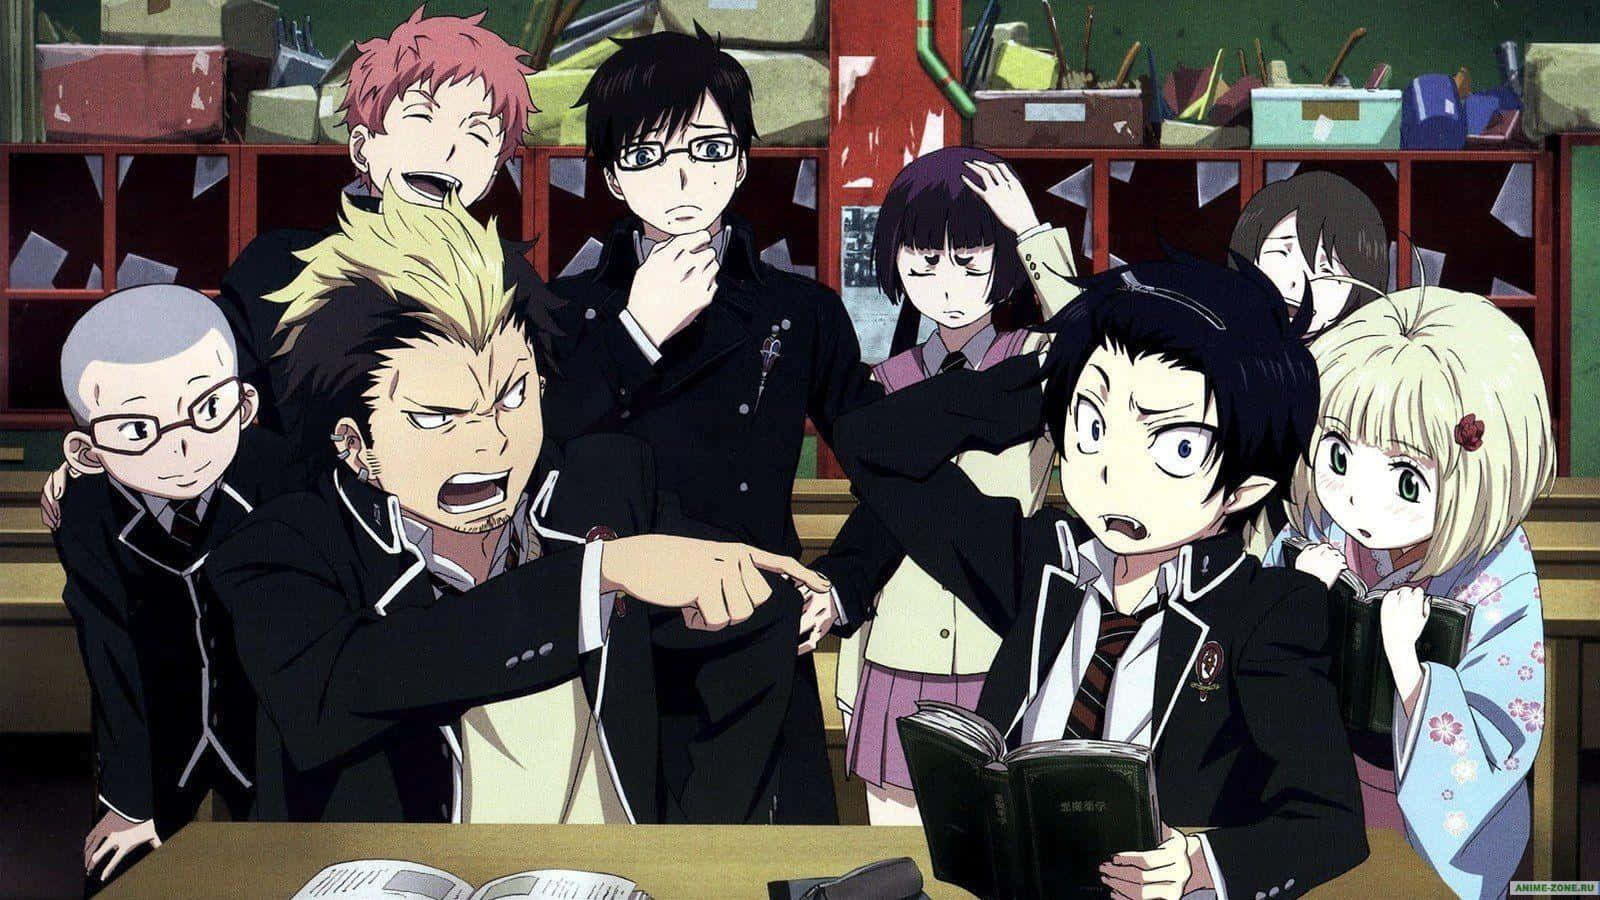 An action-packed scene from the popular anime series, Blue Exorcist